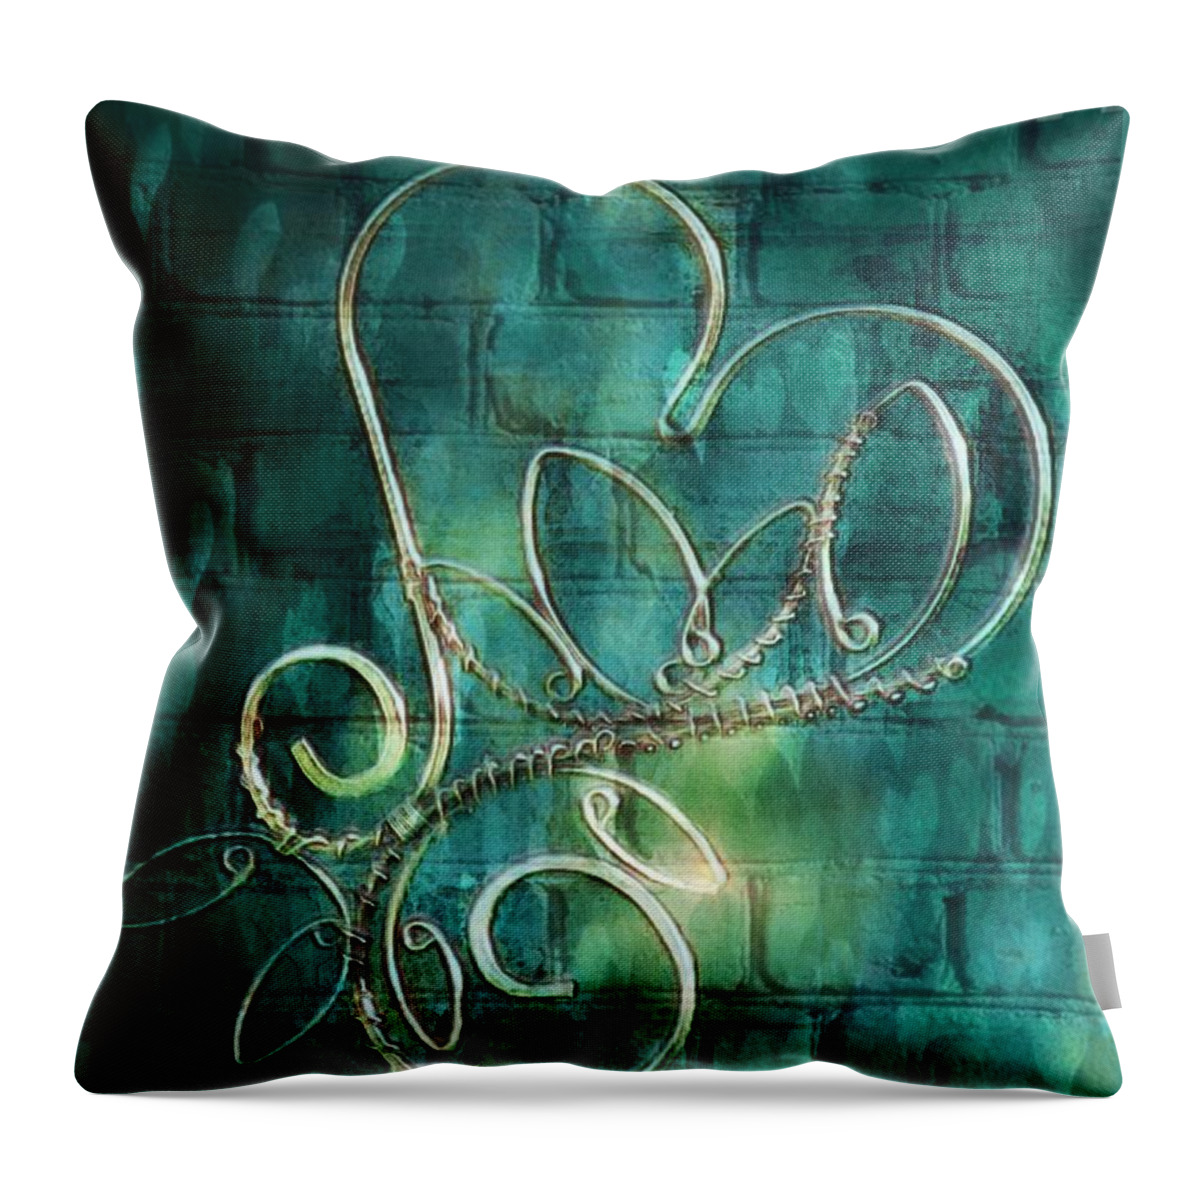 Surreal Heart Throw Pillow featuring the digital art Tunnel Of Love by Pamela Smale Williams